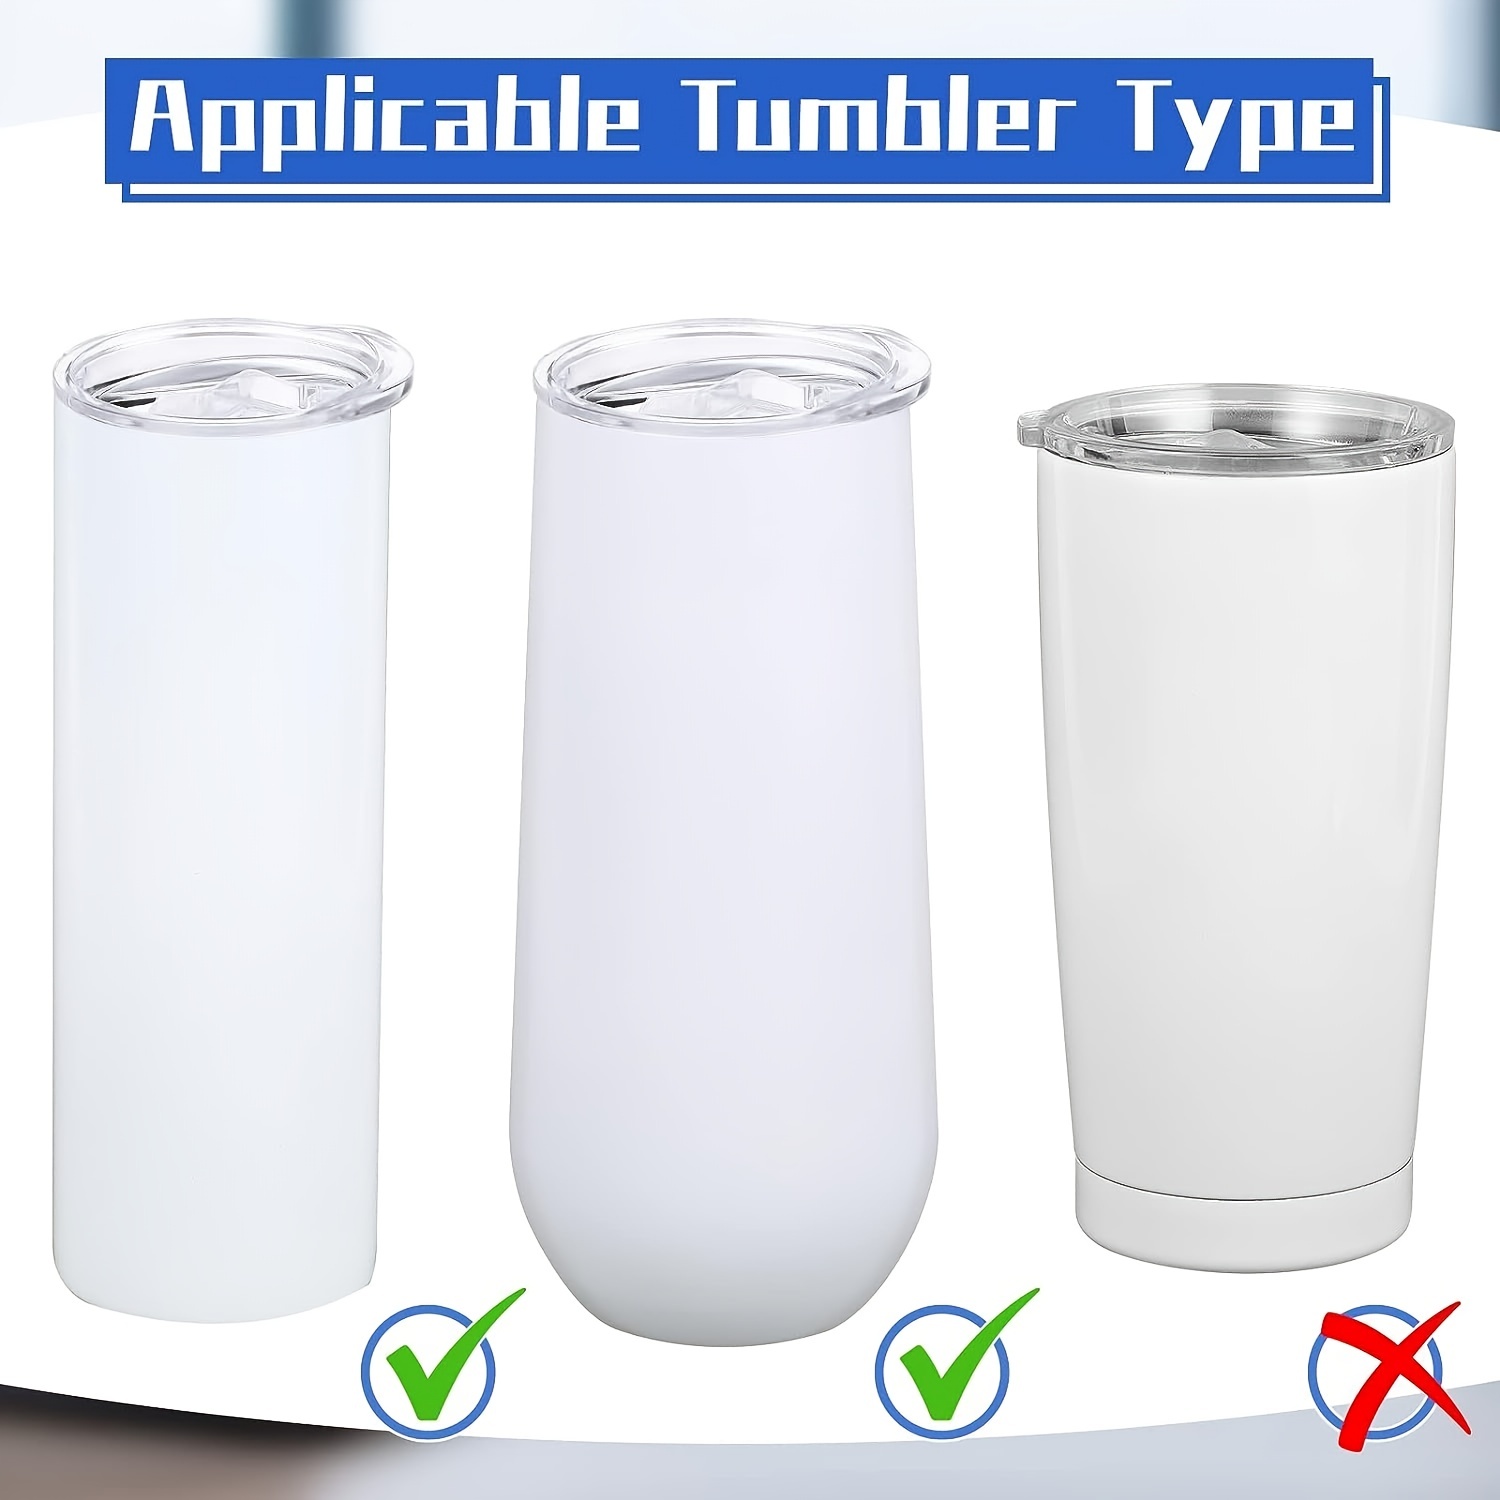 20oz Skinny Tumbler Cups Replacement Lids Compatible with YETI